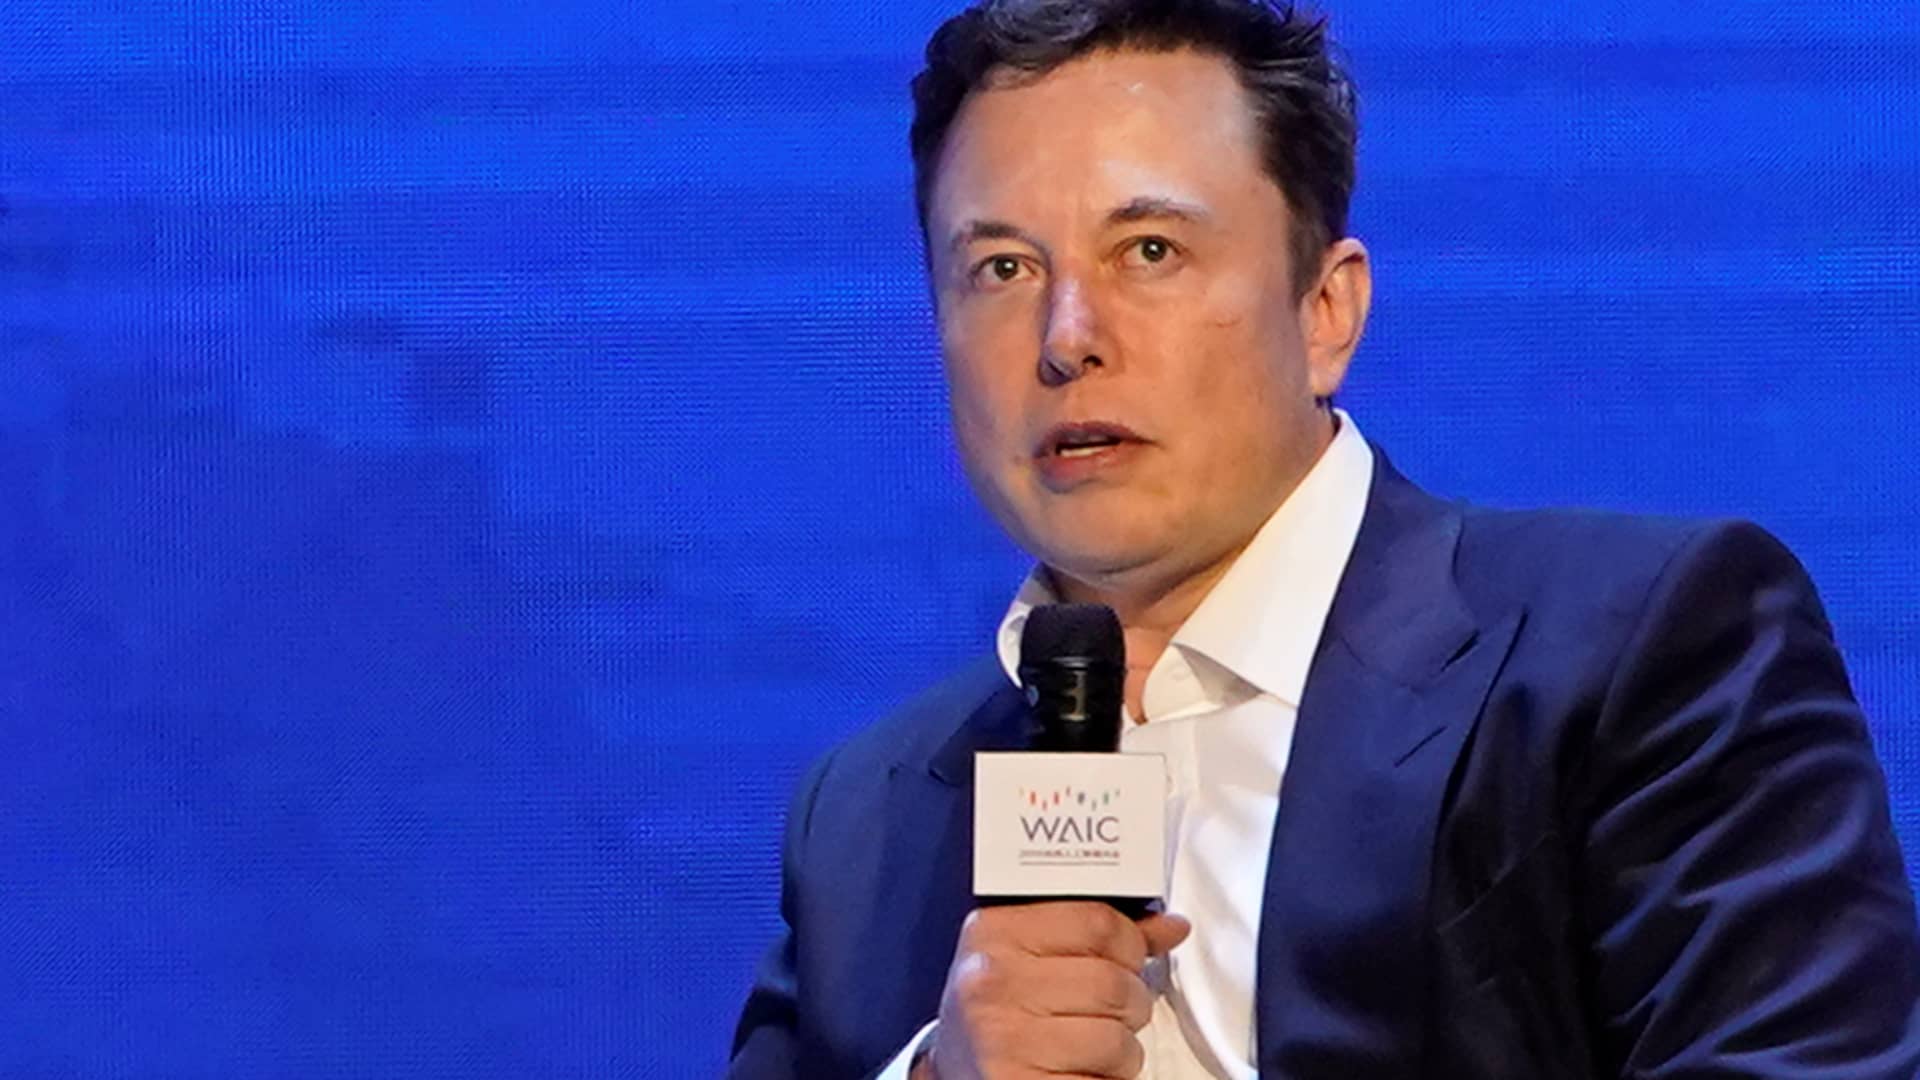 Musk reportedly says Twitter deal at lower price ‘not out of the question’